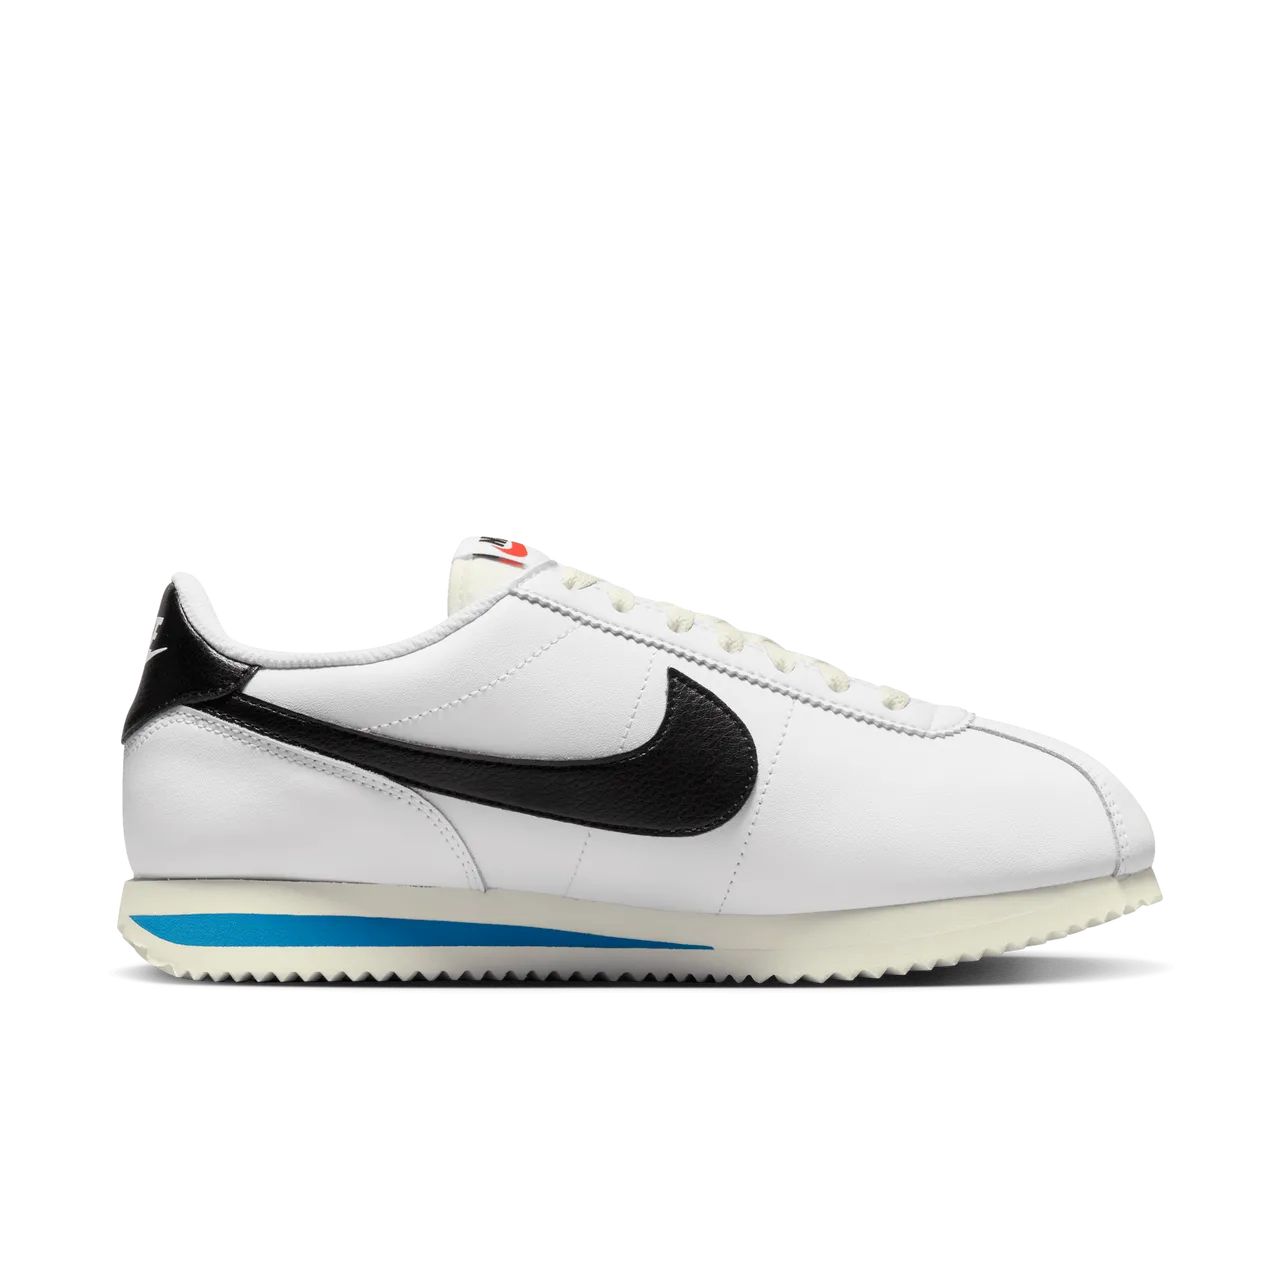 Nike Cortez Leather Women's Shoes - White - Leather